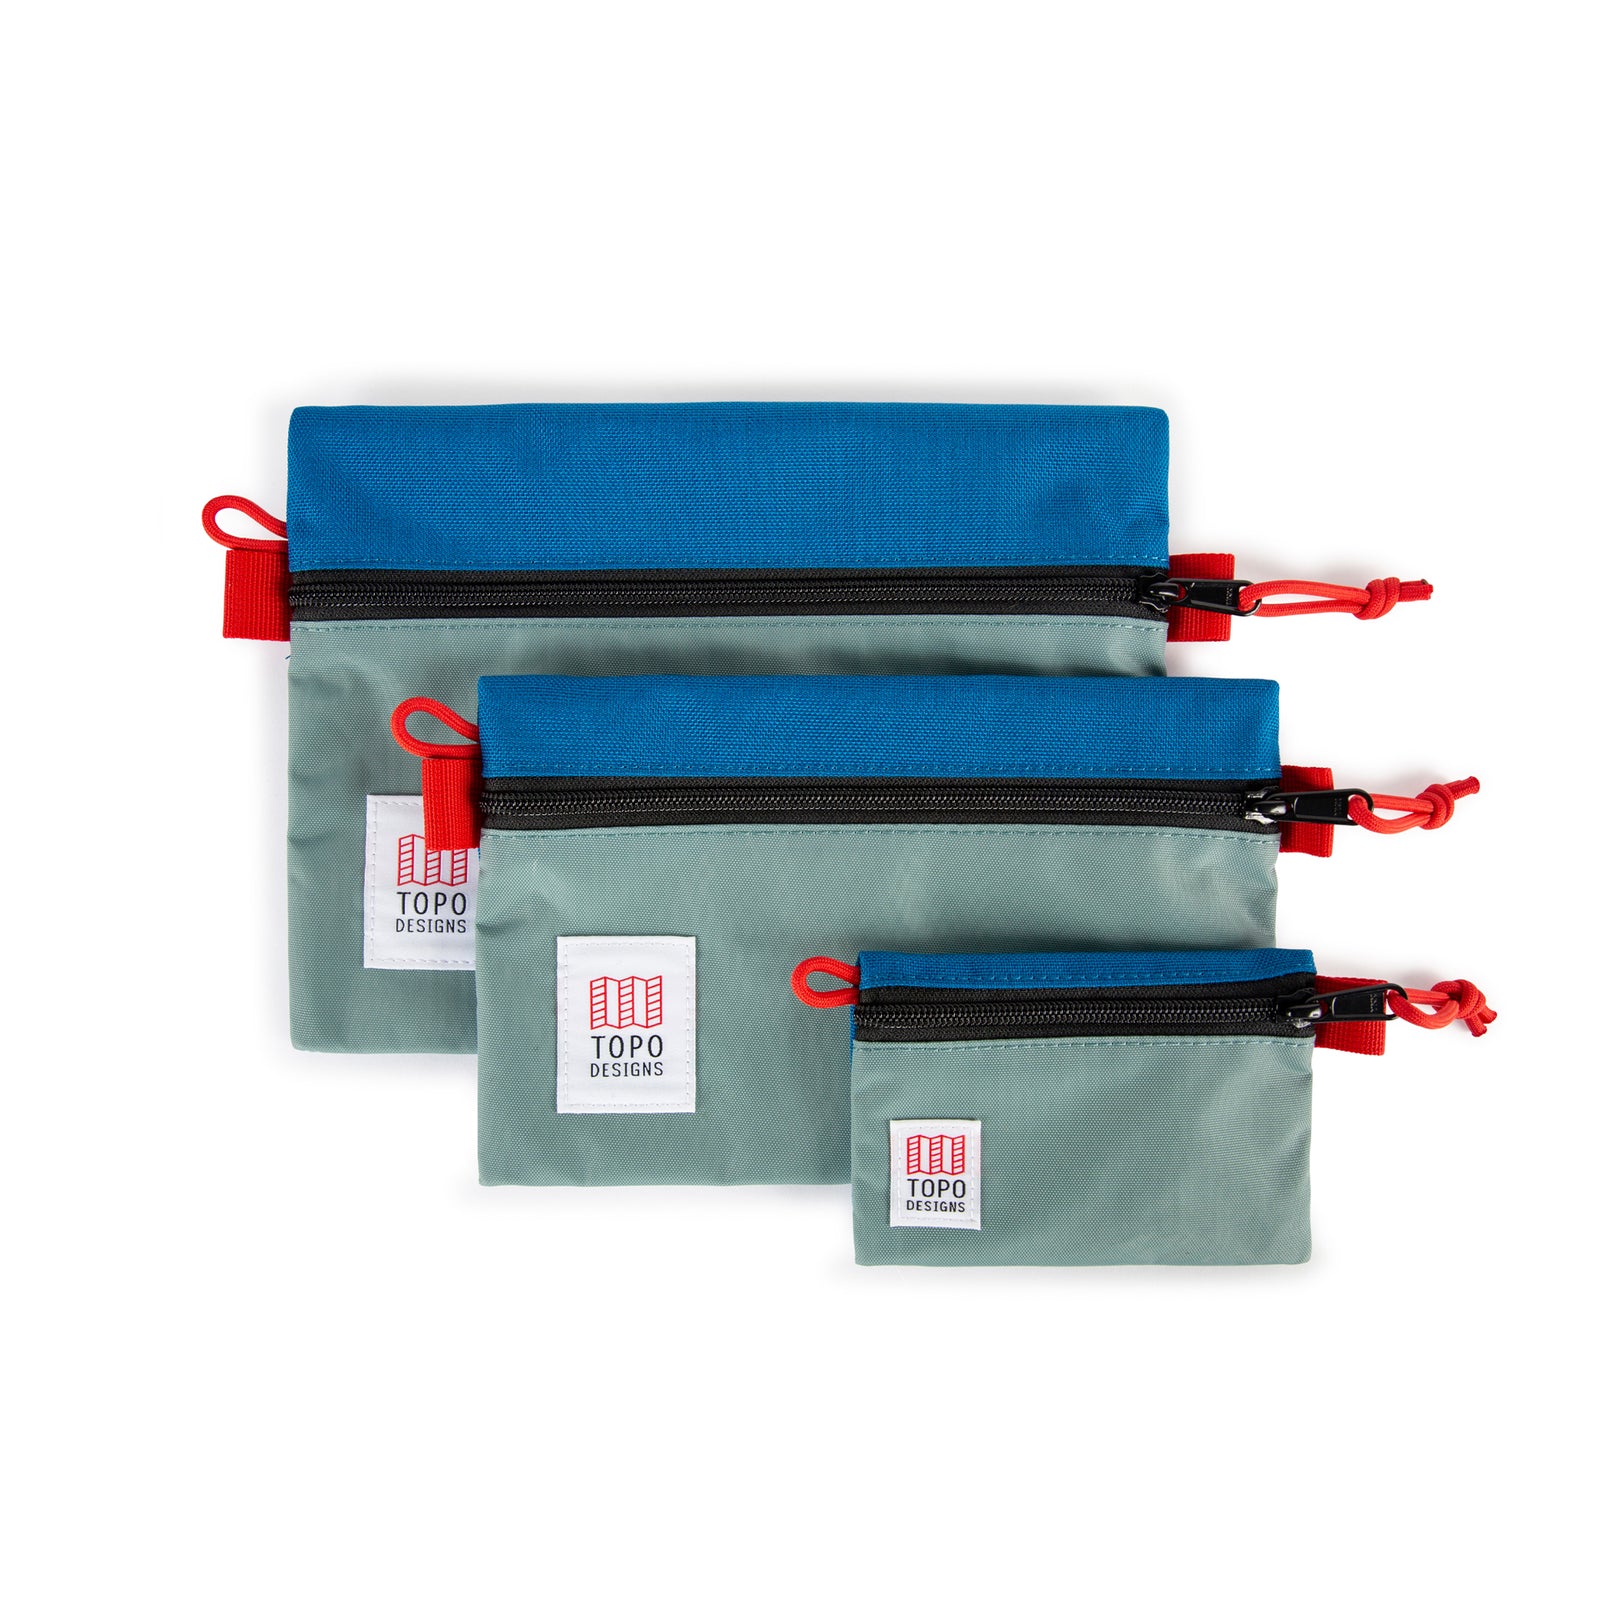 Topo Designs Accessory Bags - product shot of the "Medium", "Small", and "Micro" accessory bags in "Mineral Blue / Blue - Recycled".